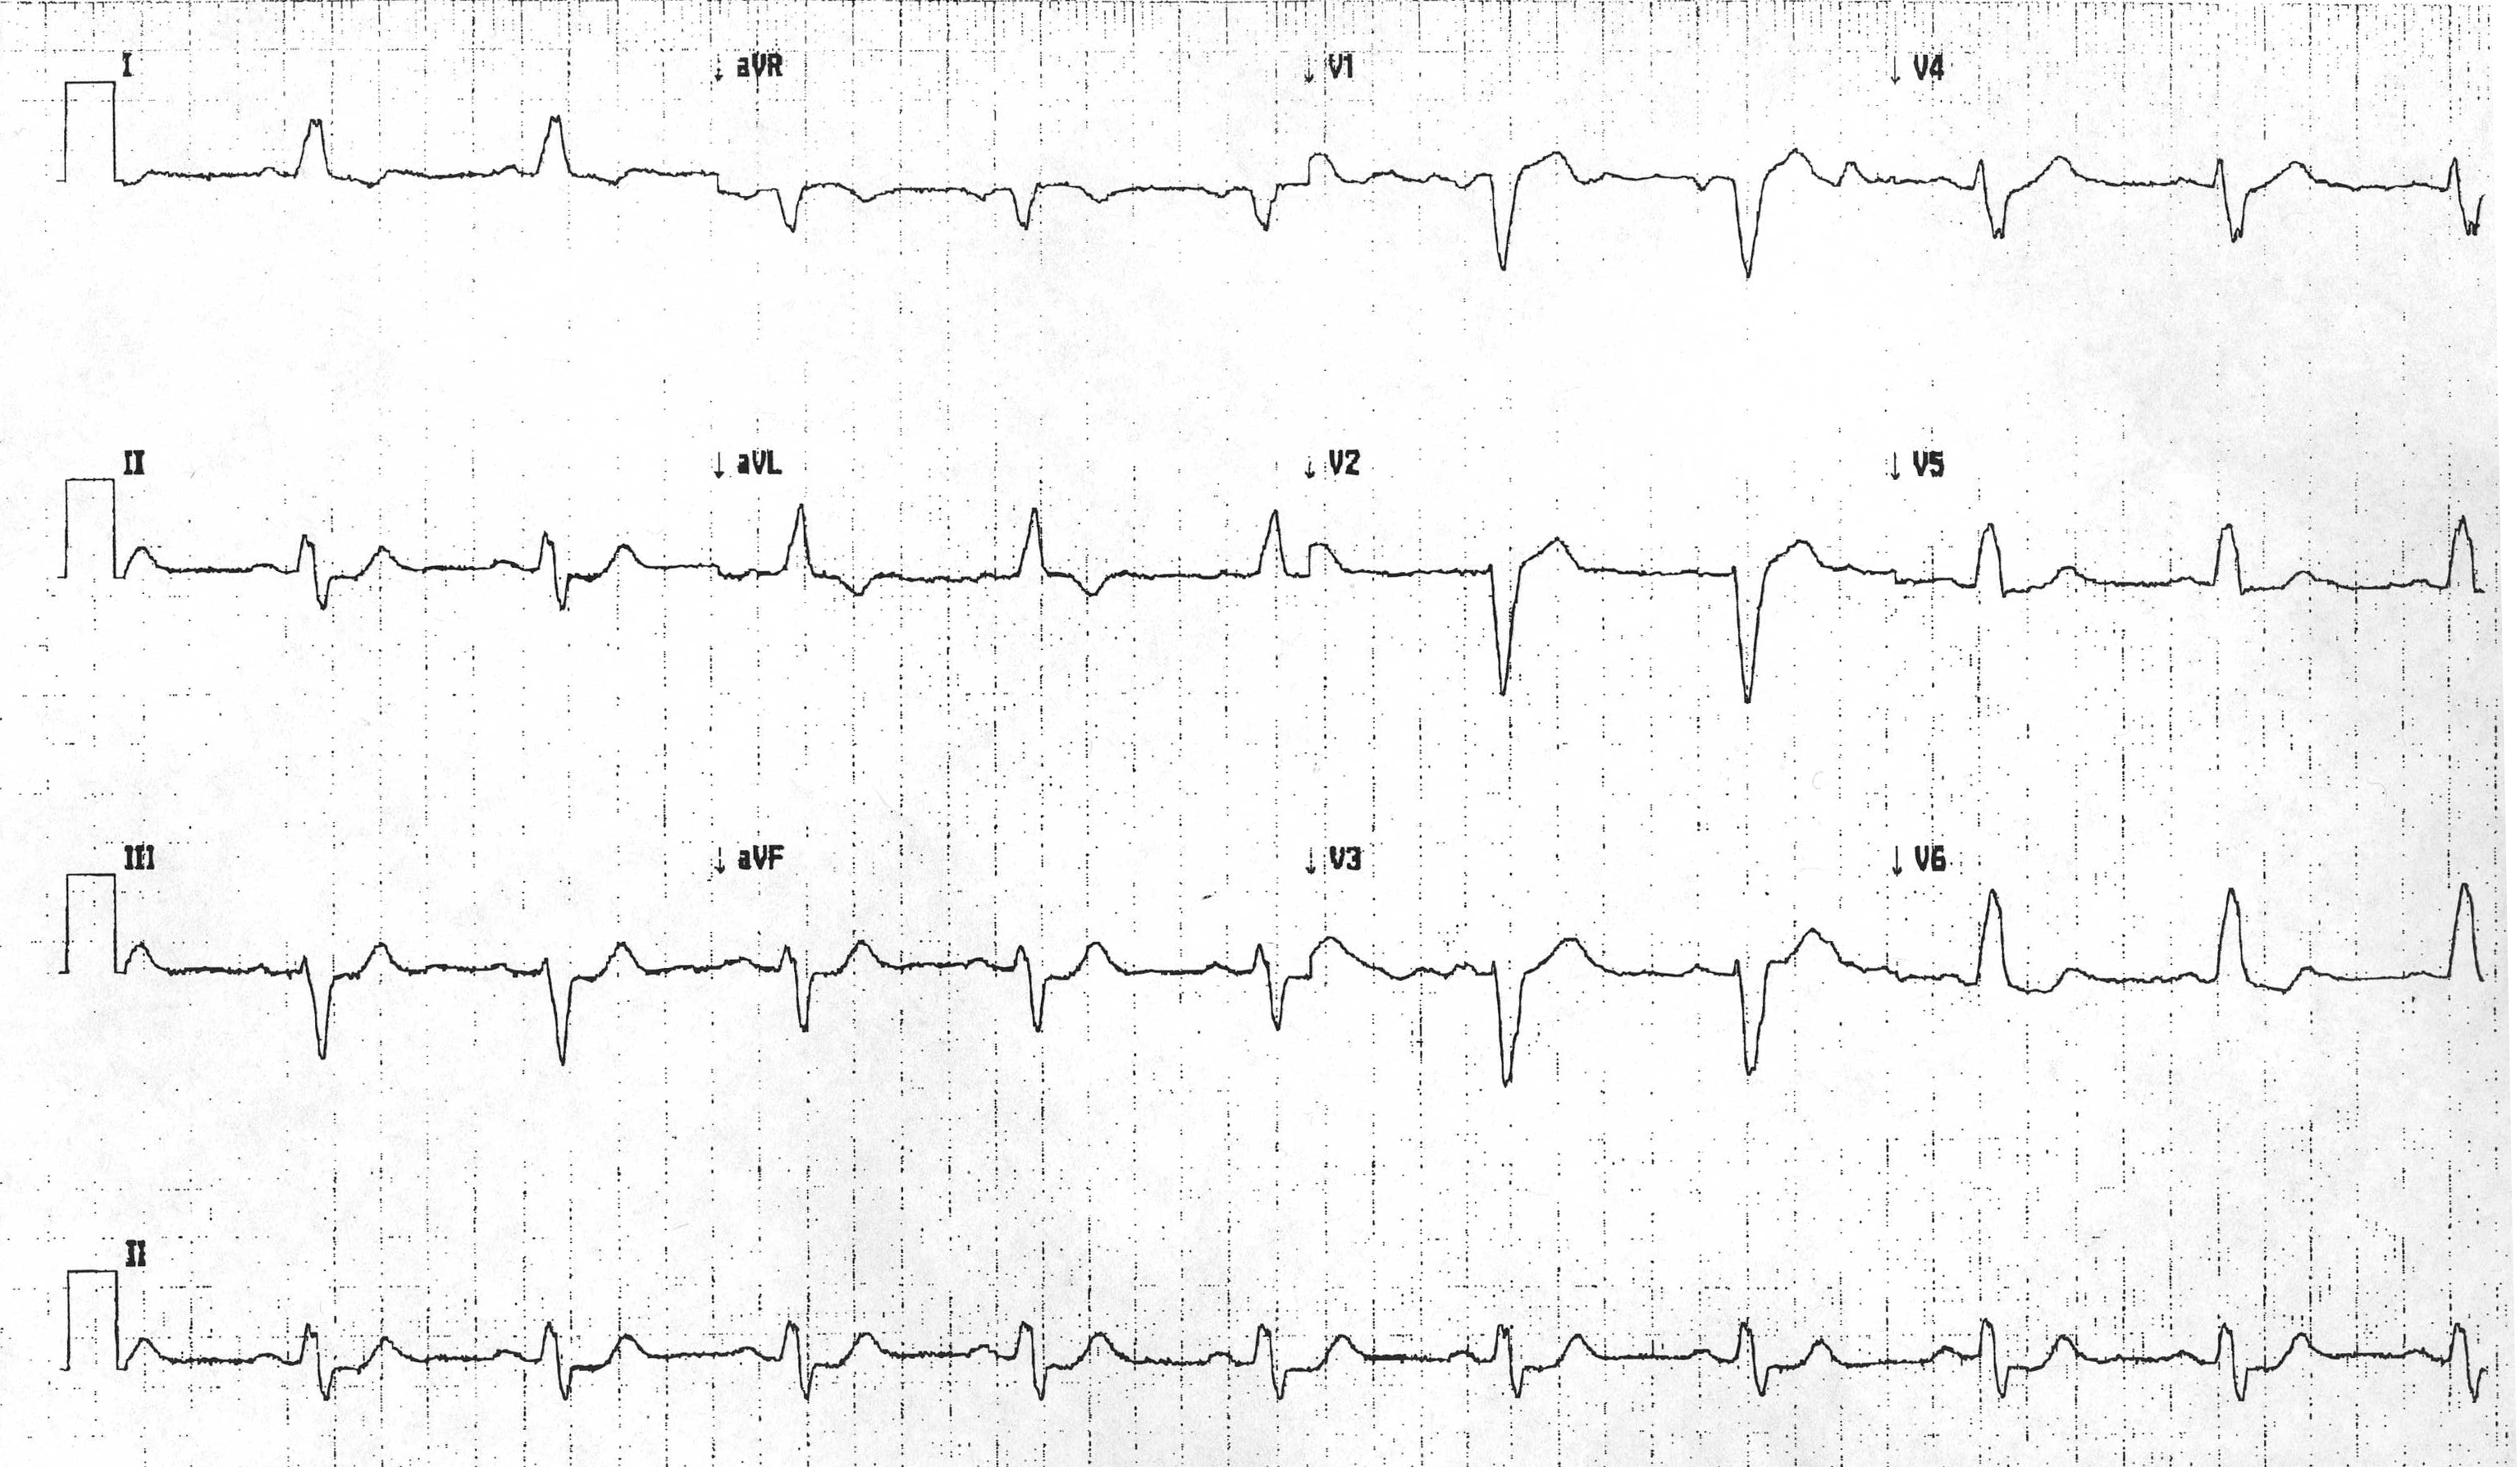 LBBB with pseudonormalization of T waves.jpg